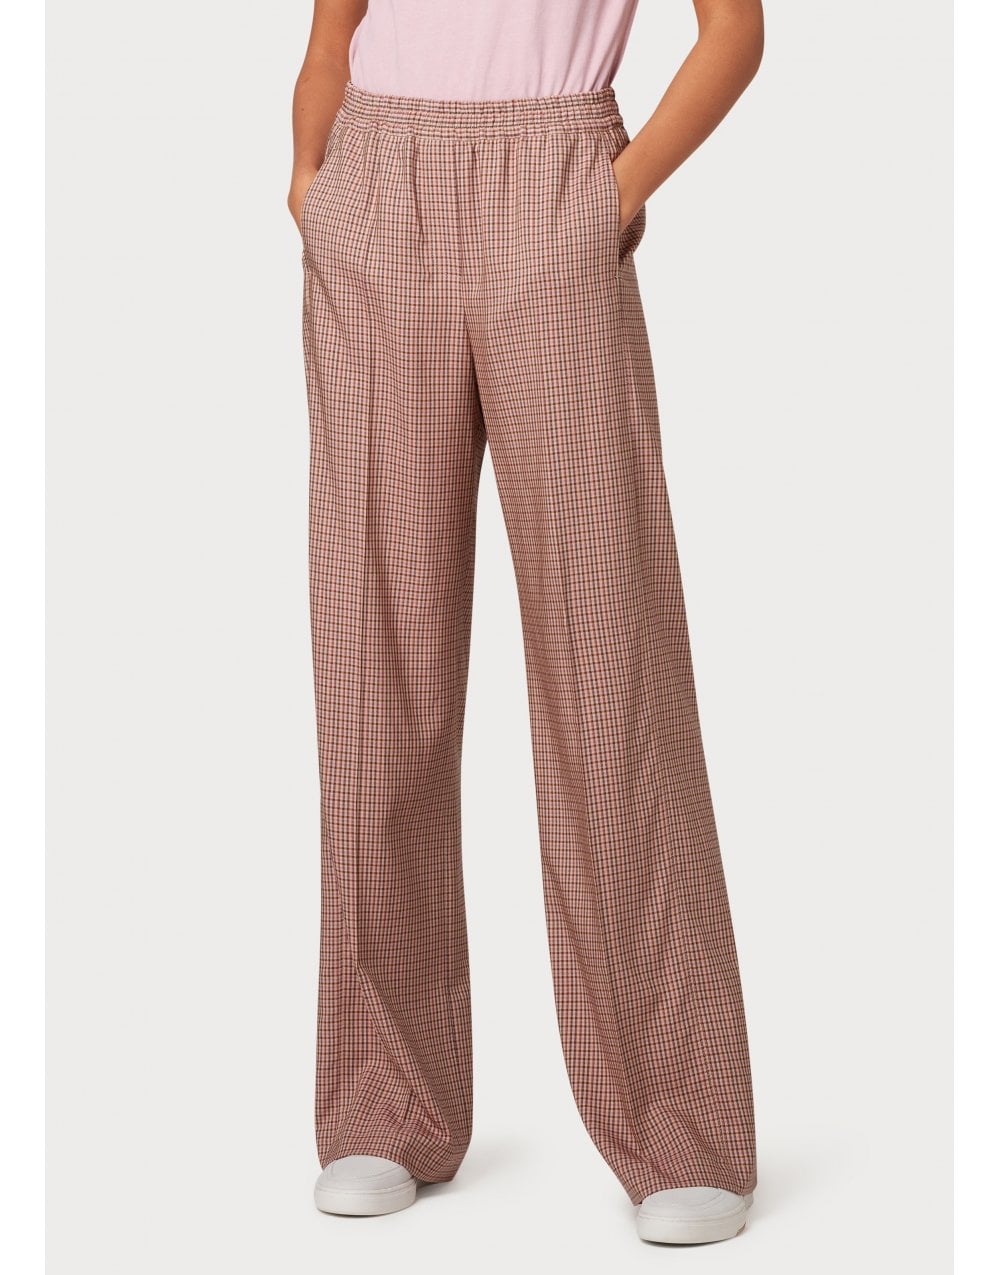 Paul Smith Check Elasticated Relaxed Trouser Col: 52 Brown Multi, Size